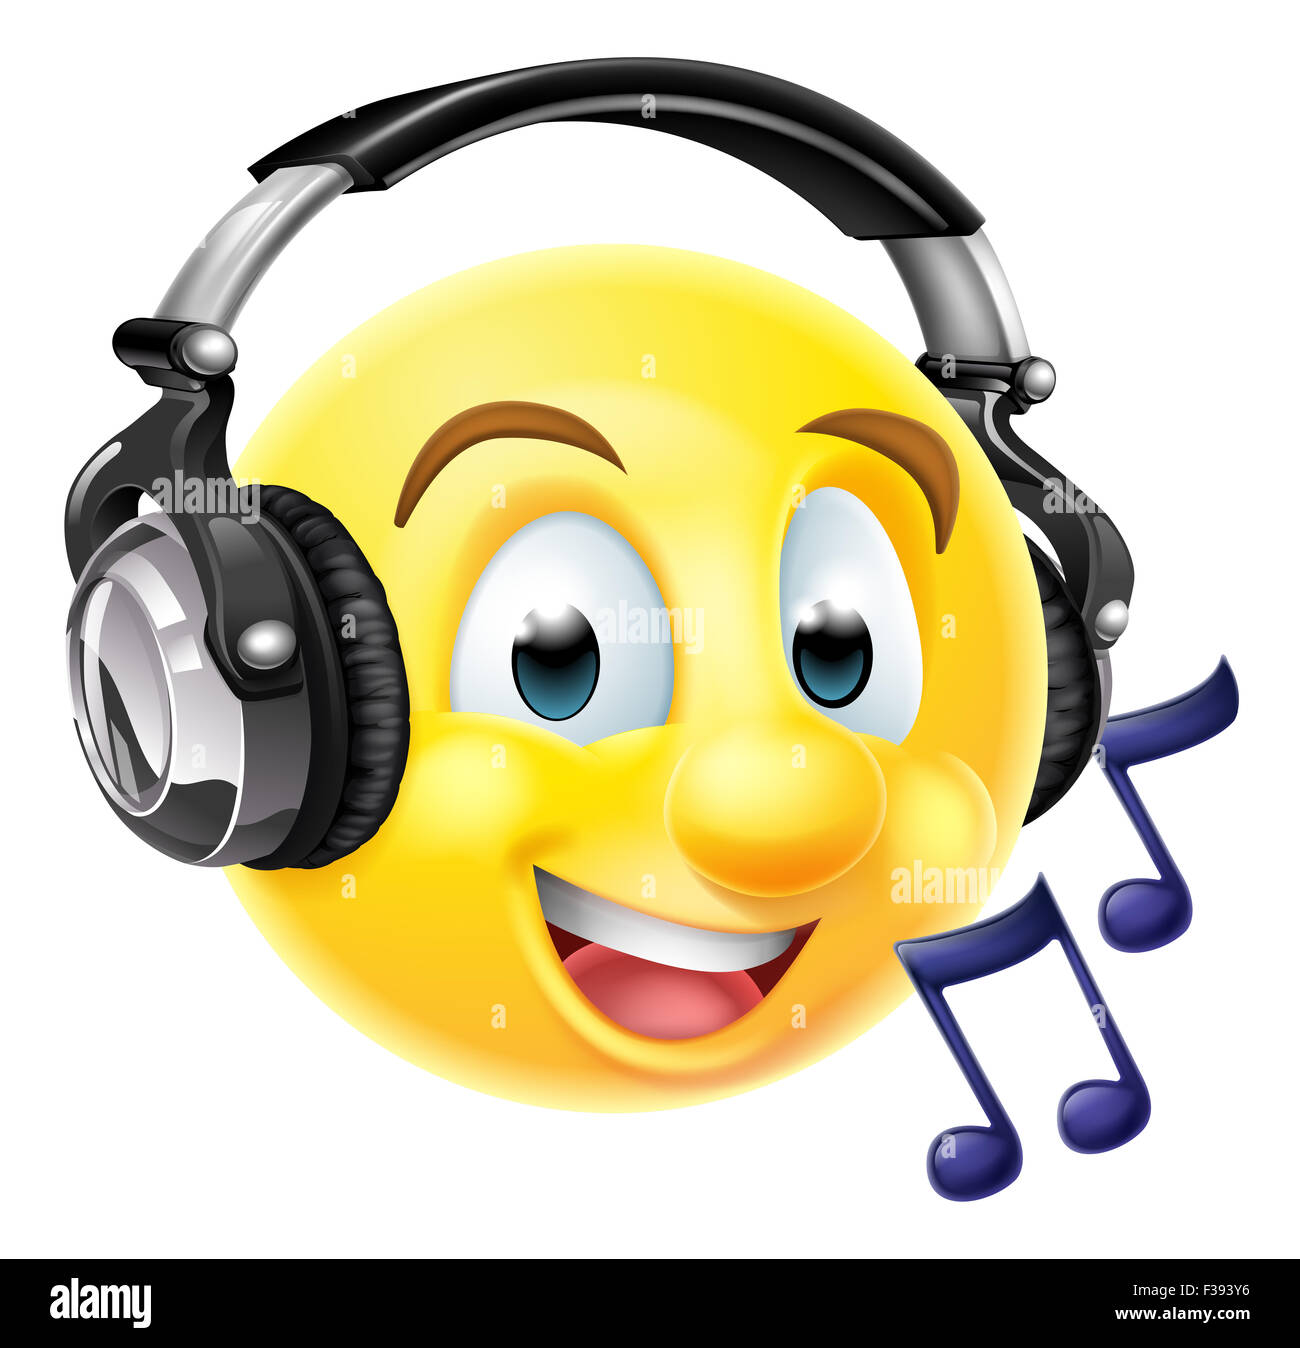 An emoticon emoji wearing headphones and listening to music or singing along.  With musical notes Stock Photo